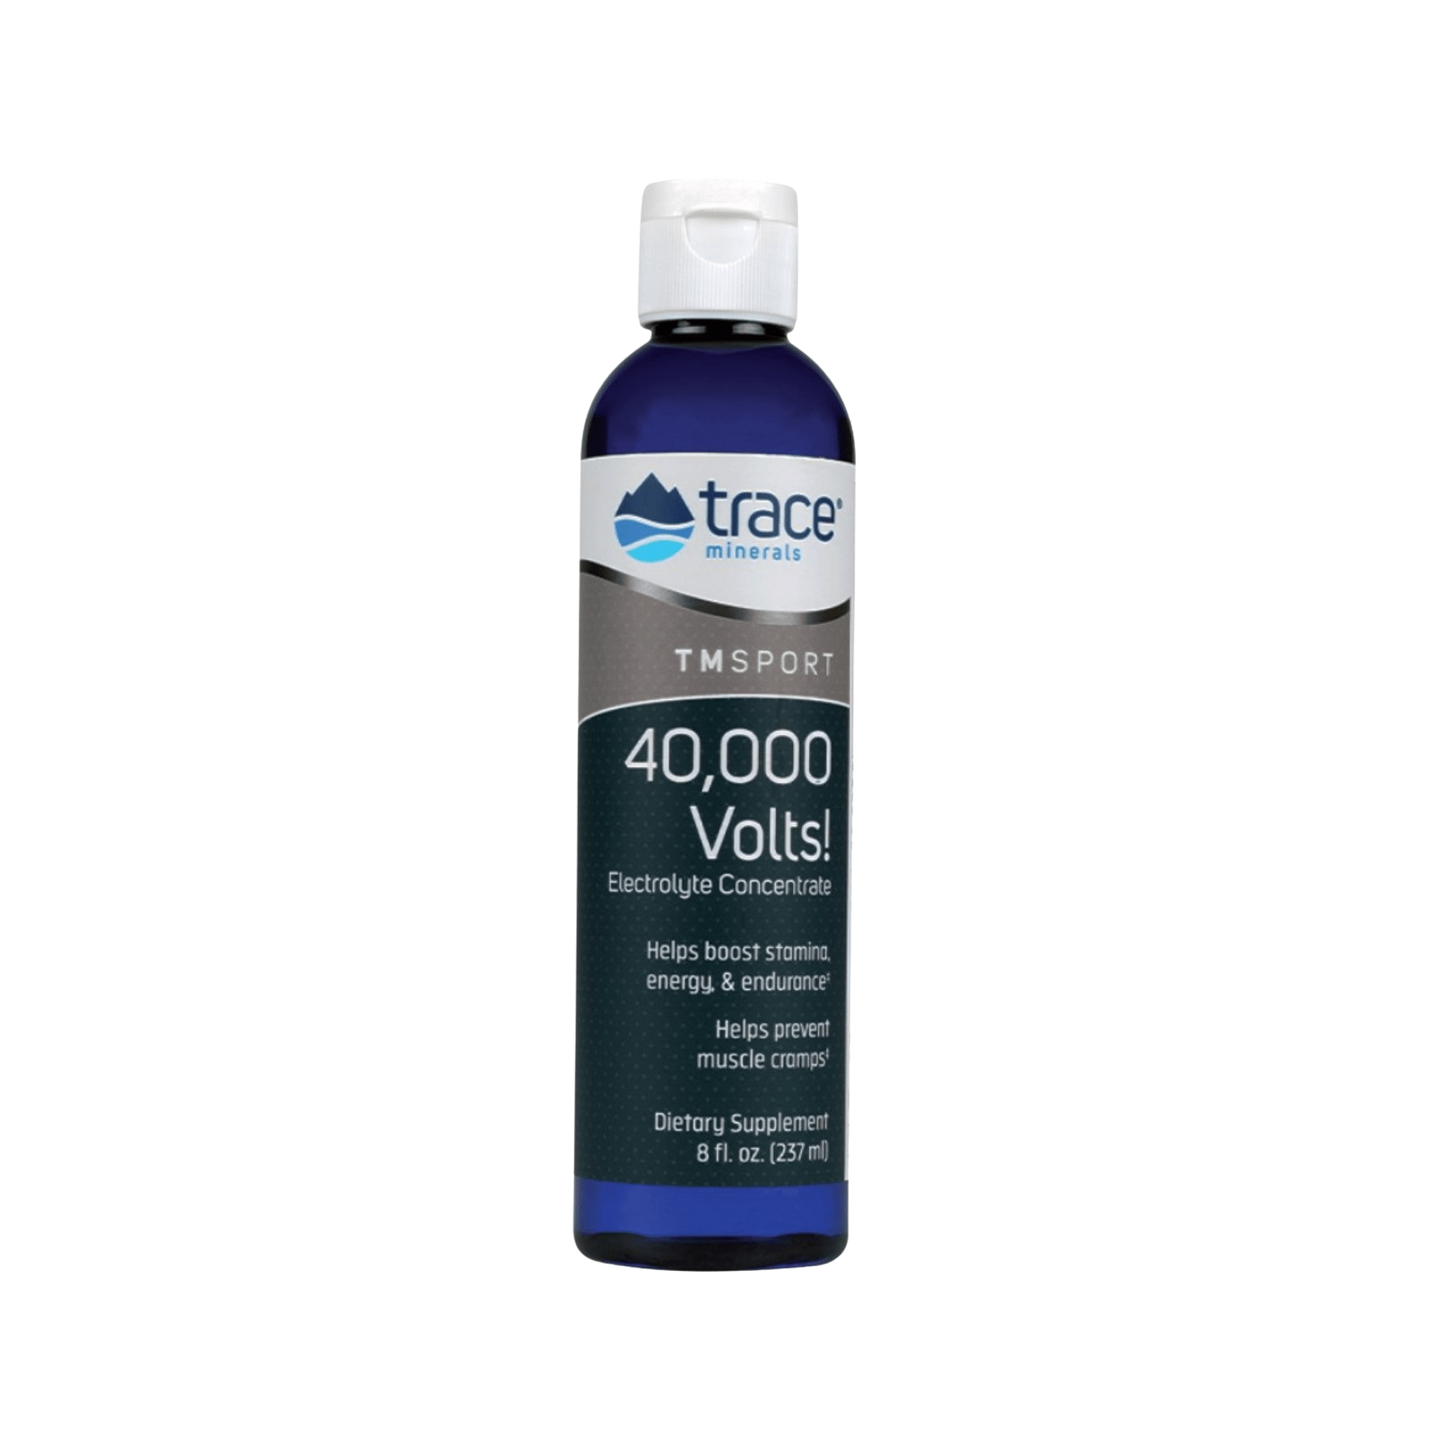 Trace Minerals Research 40,000 Volts Electrolyte Concentrate